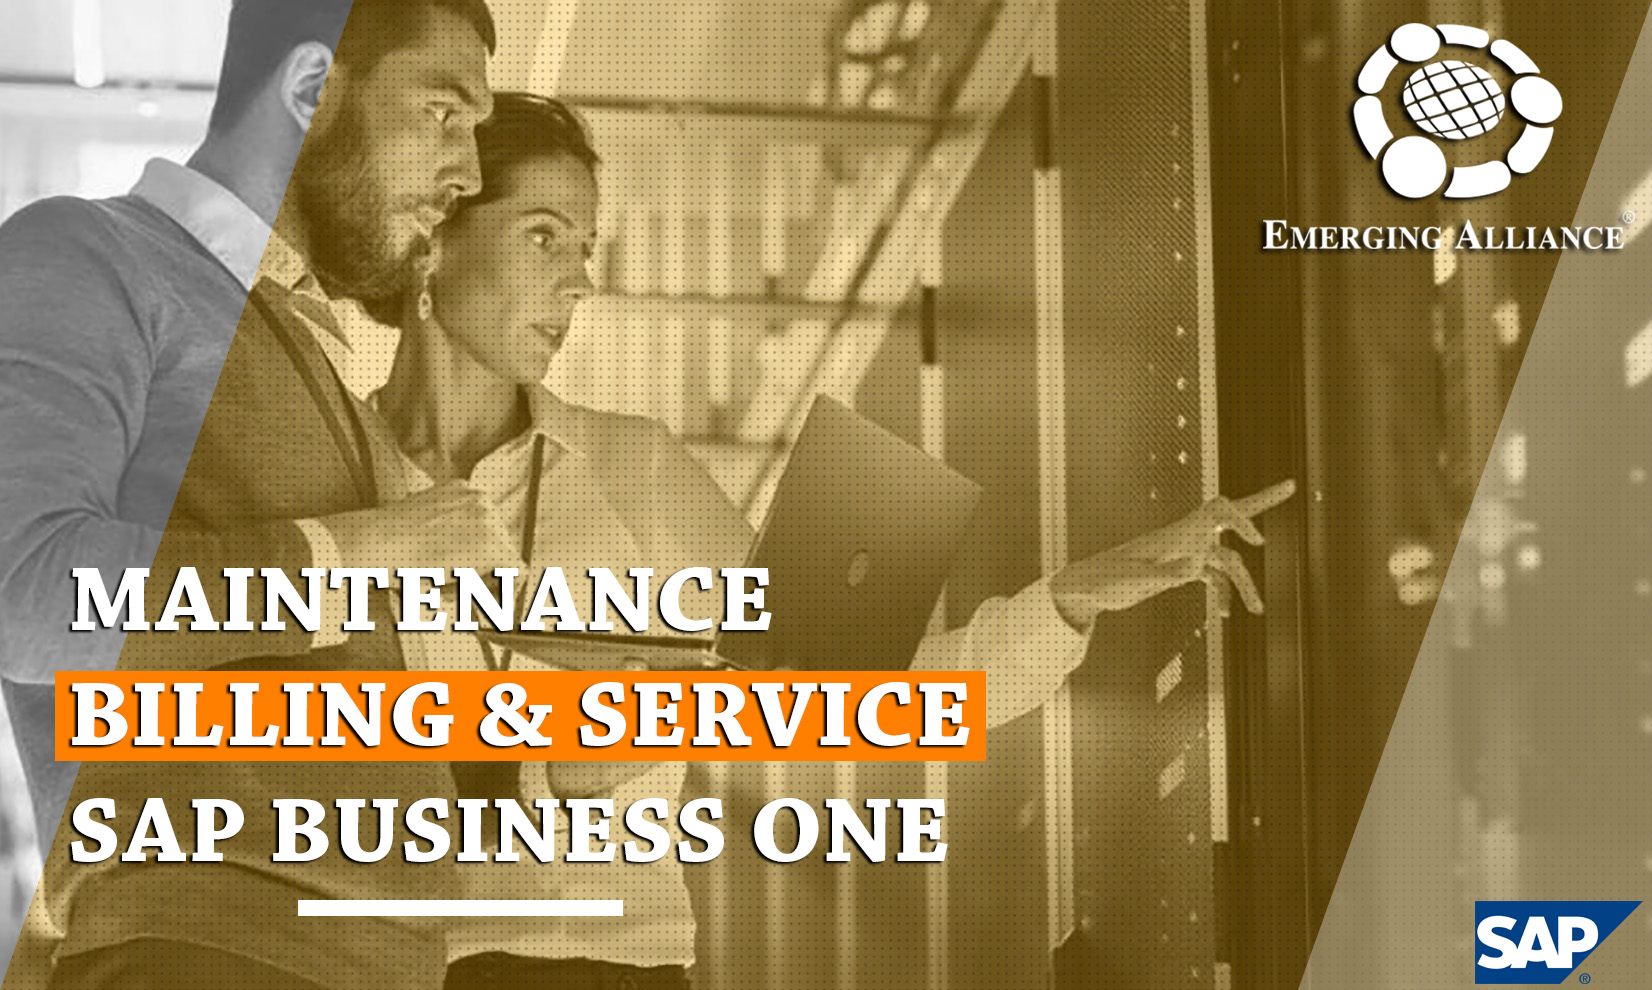 Maintenance billing and service - sap business one